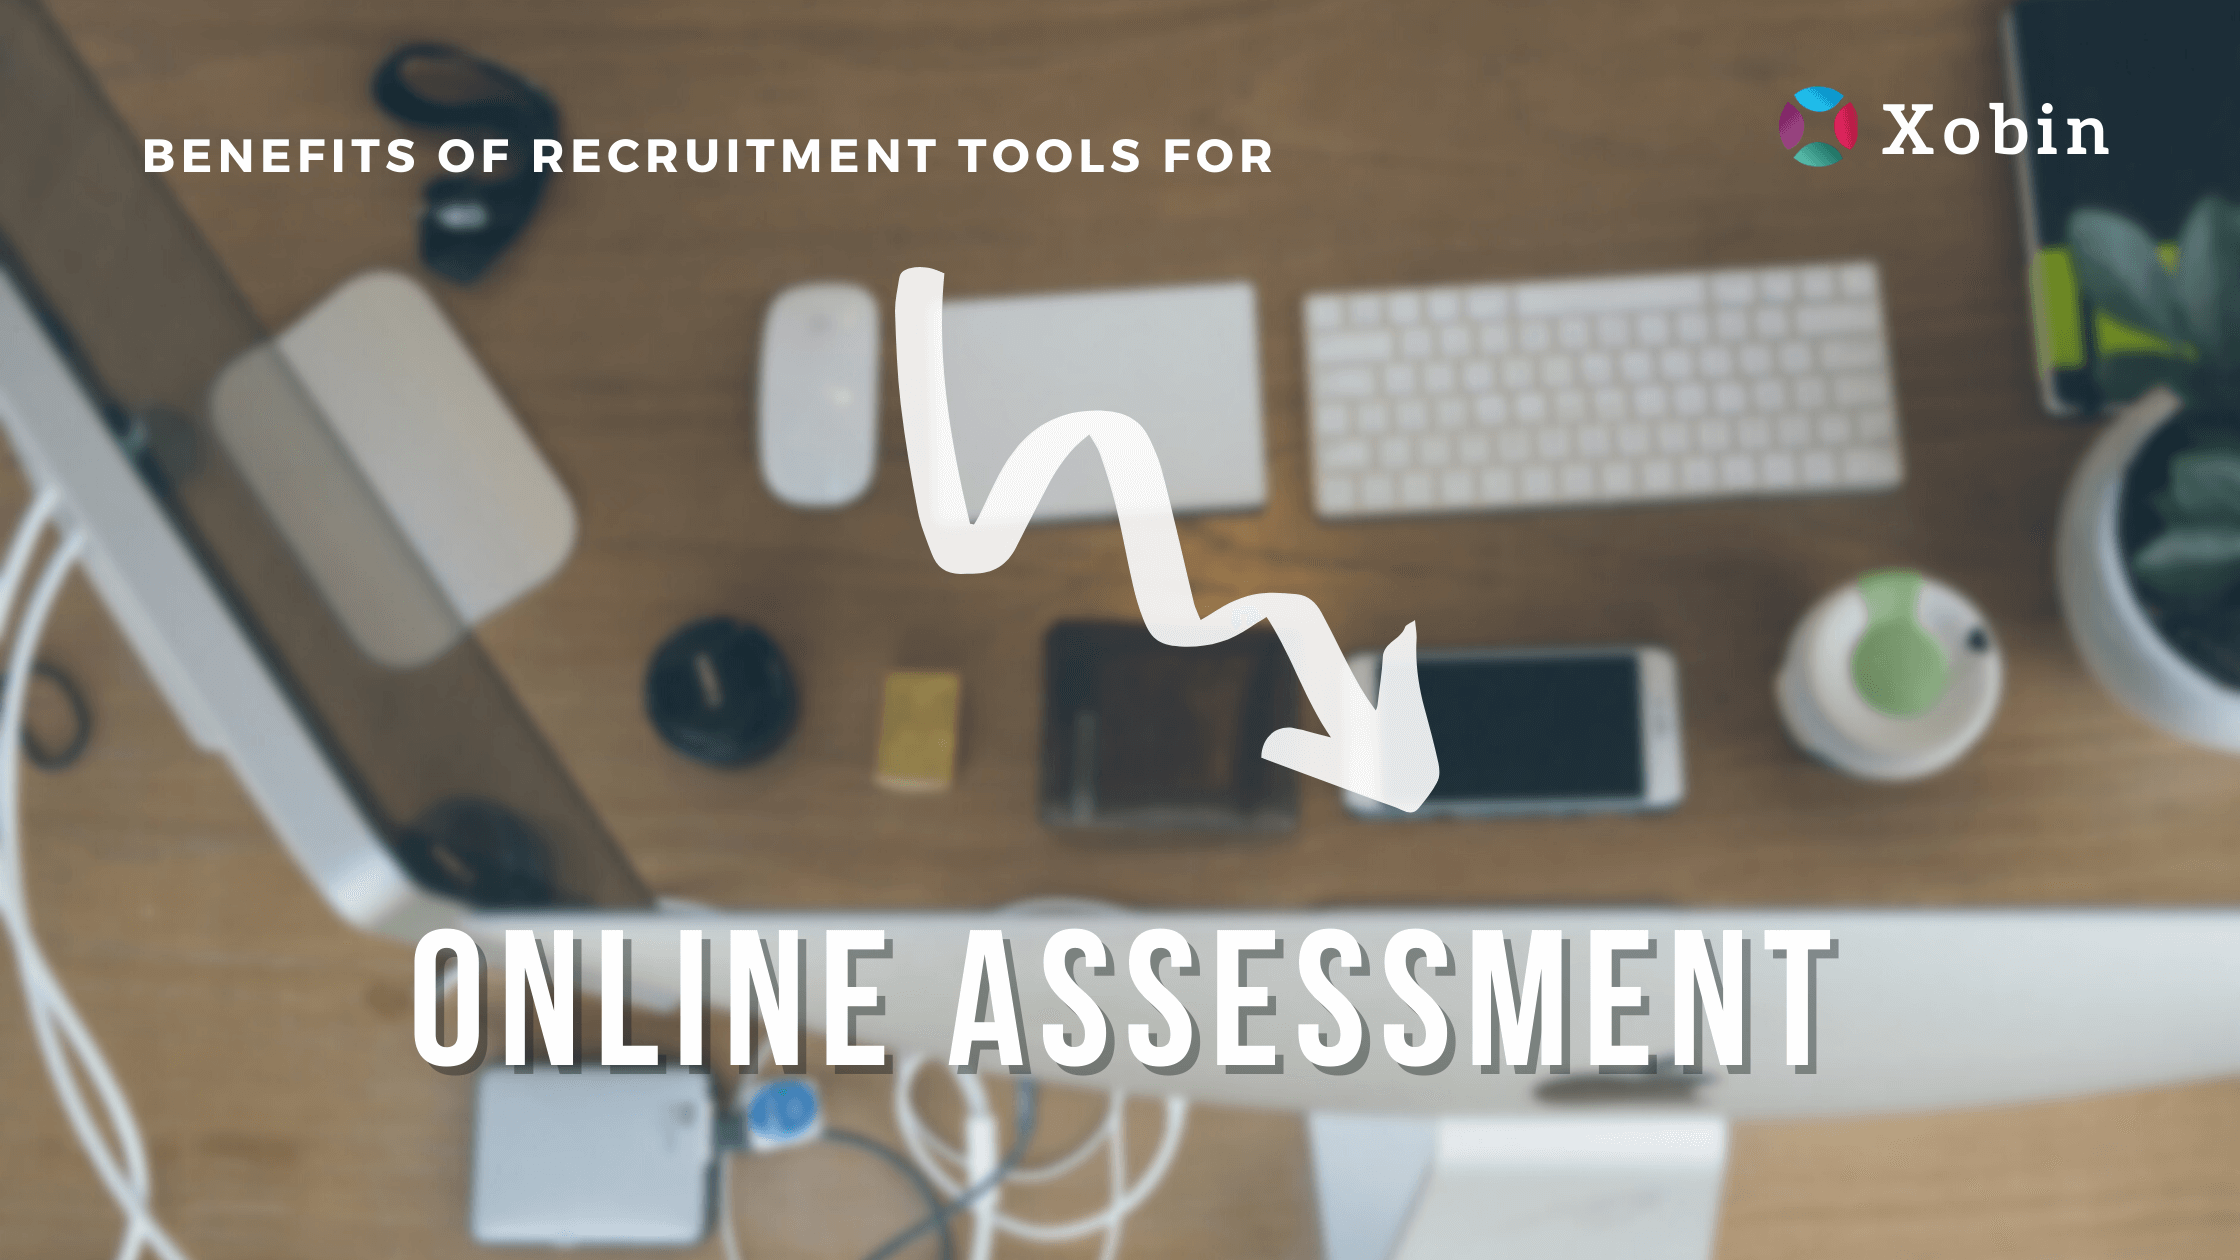 Benefits of Online Assessment Tools for Recruitment